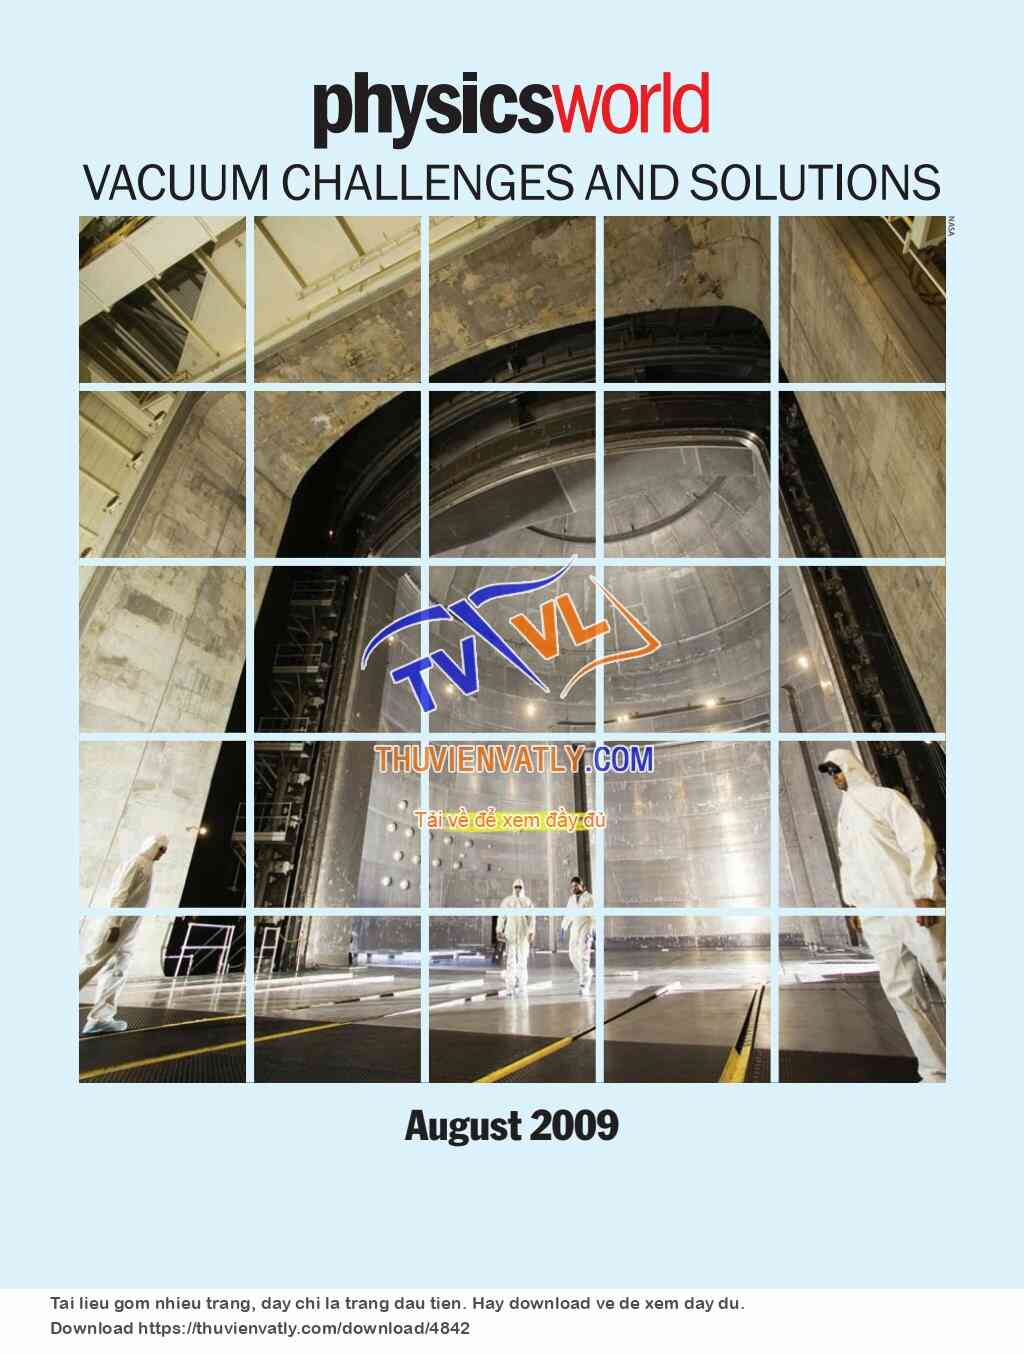 Physics world vacuum challenges and solutions - vacuum challenges and solutions